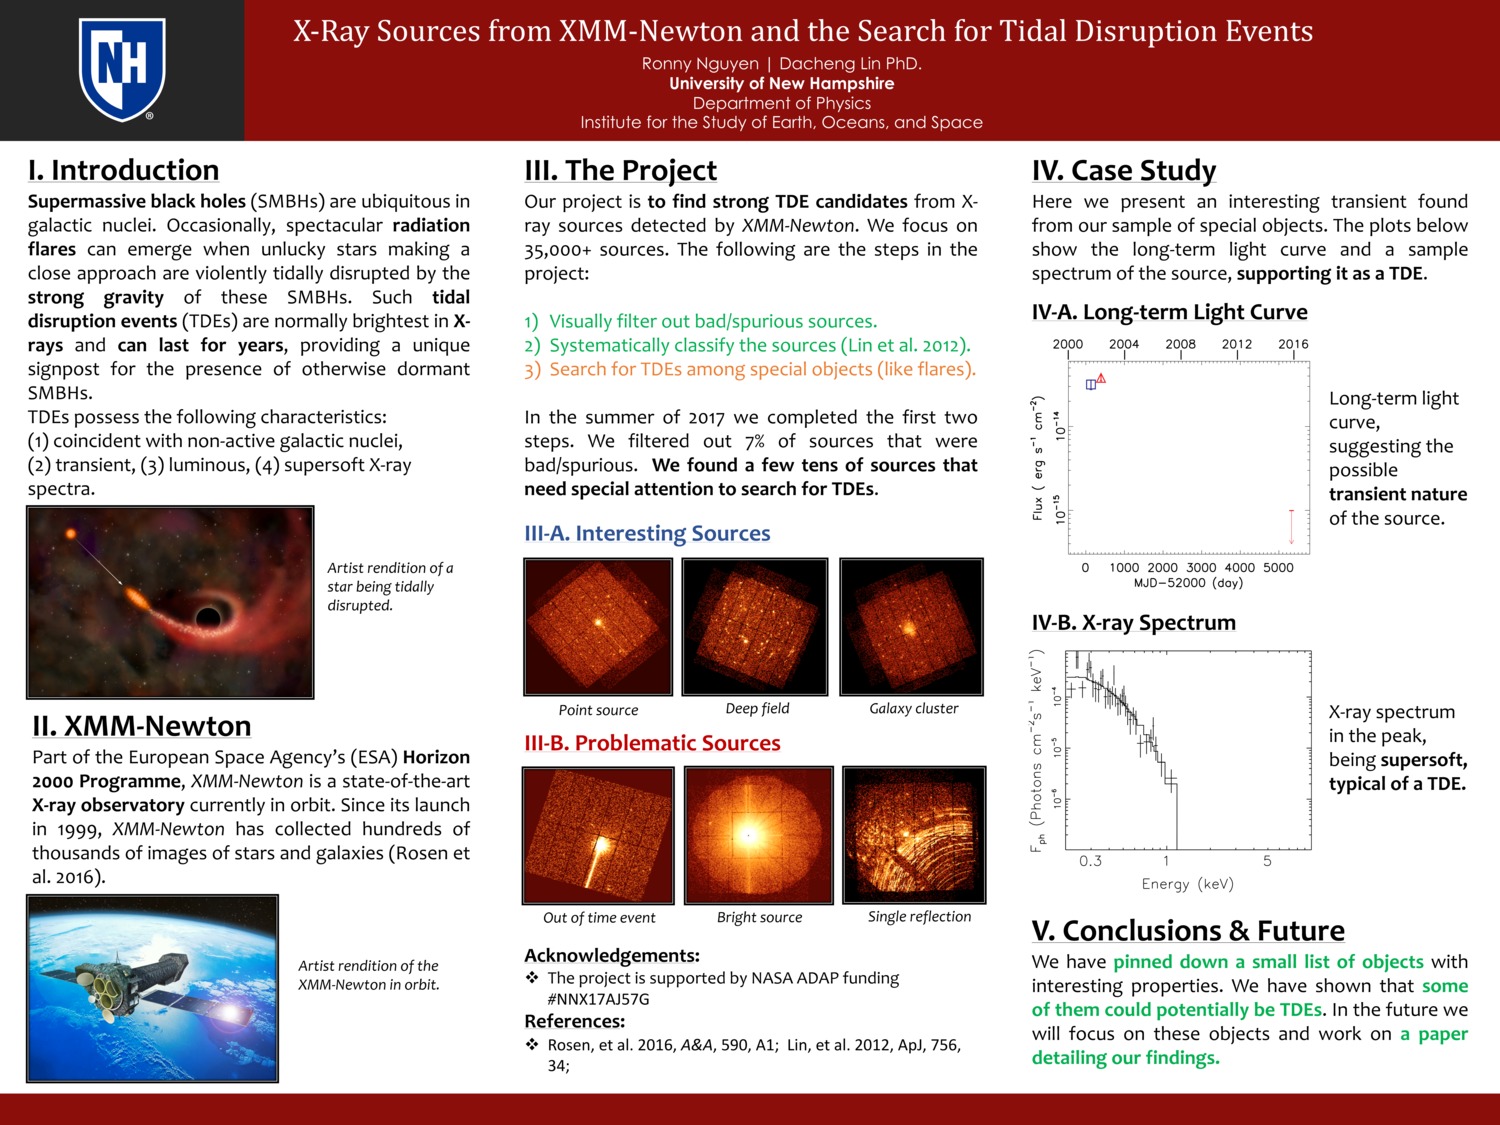 X-Ray Sources From Xmm-Newton And The Search For Tidal Disruption Events by rn1007